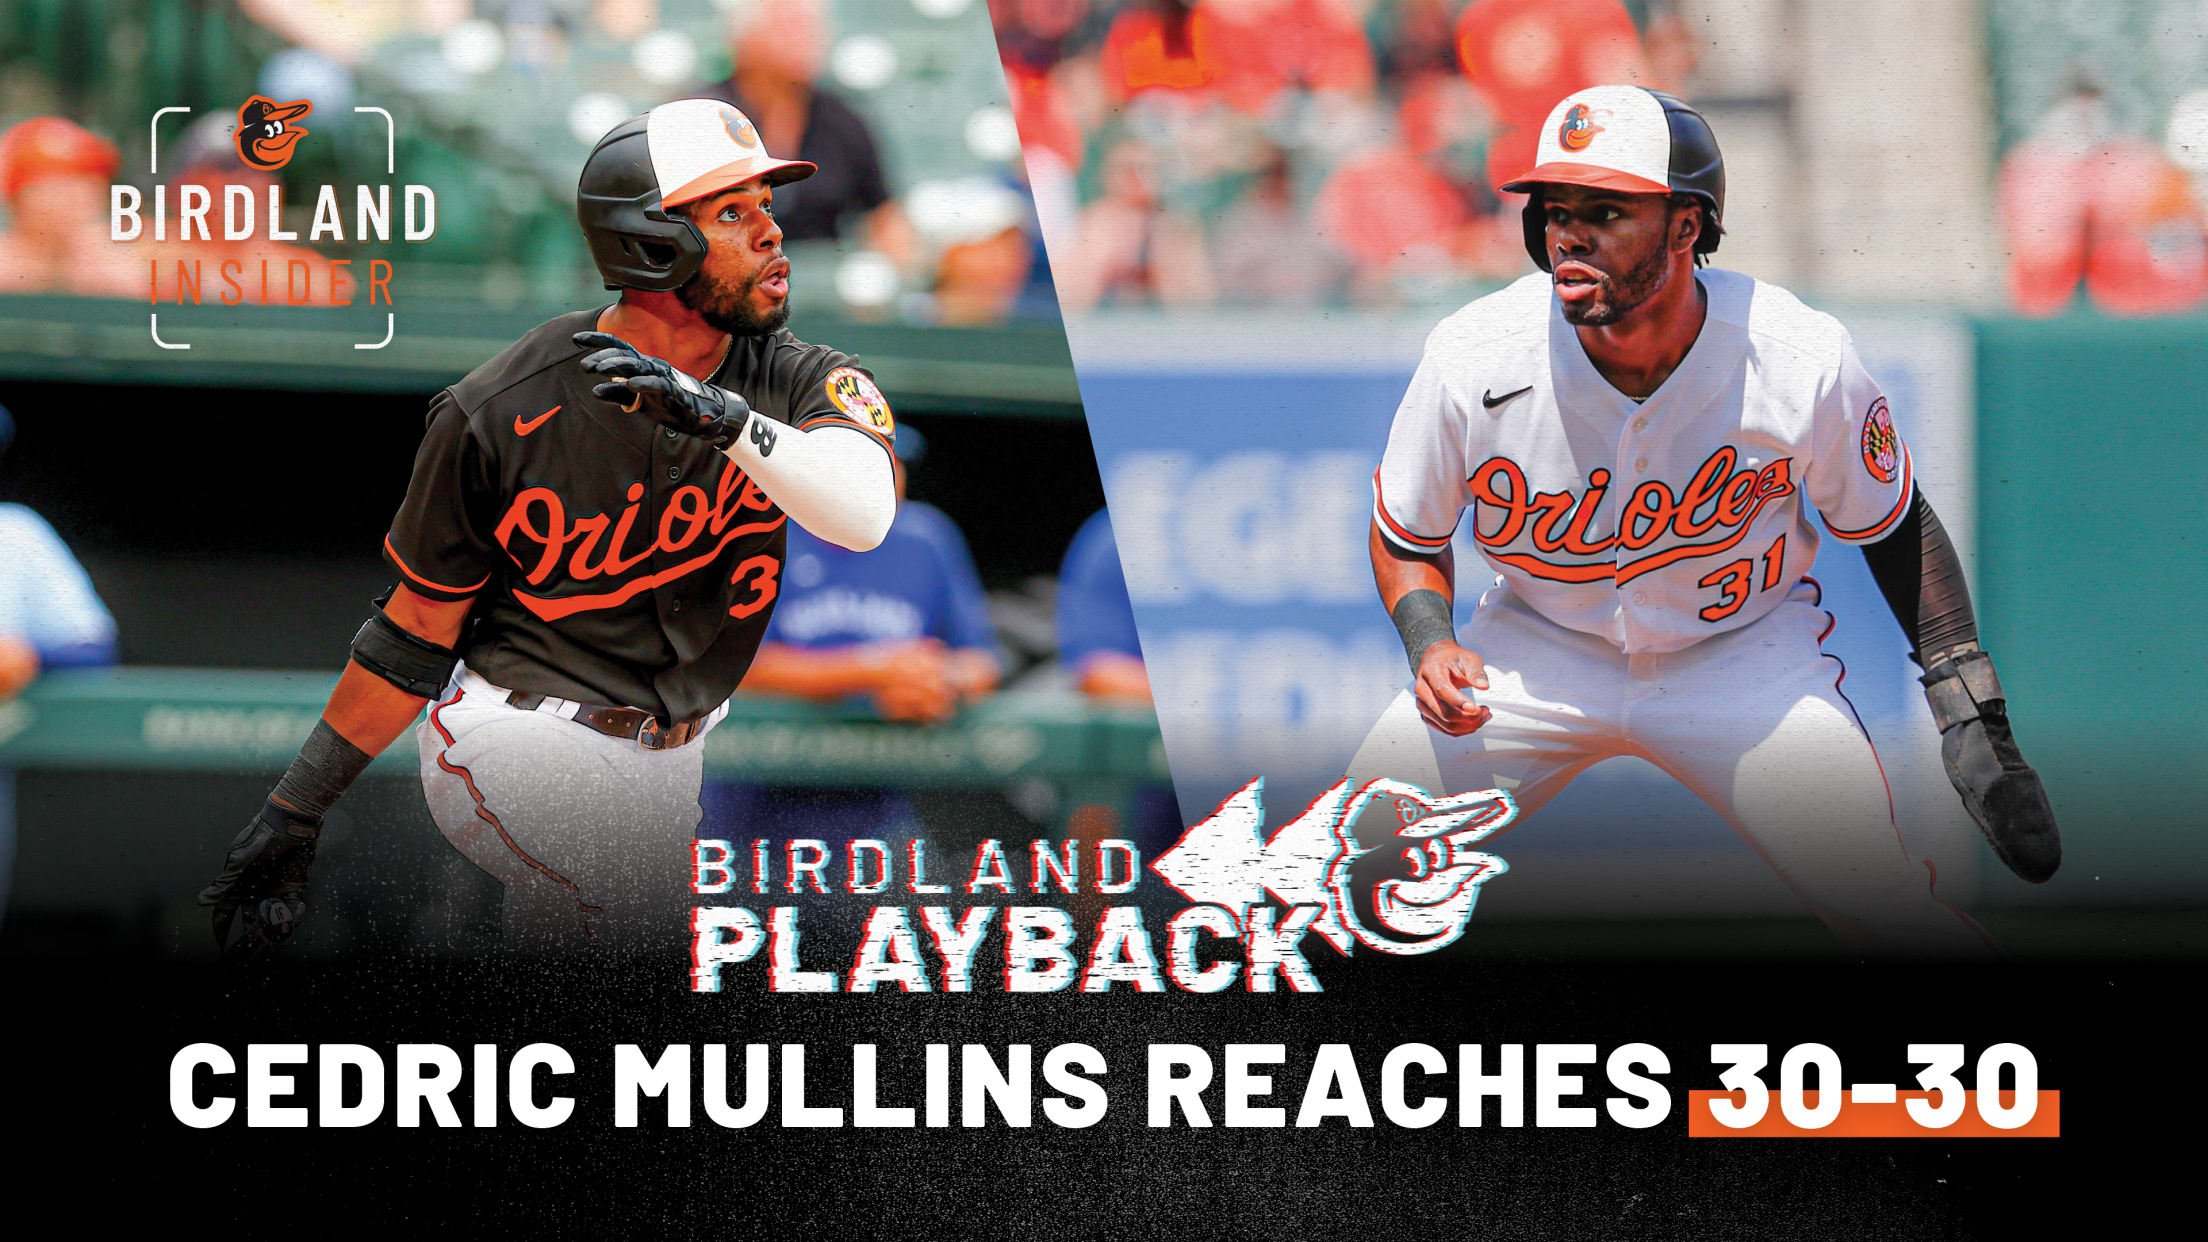 Baltimore Orioles' Cedric Mullins Becomes 7th Player in Team